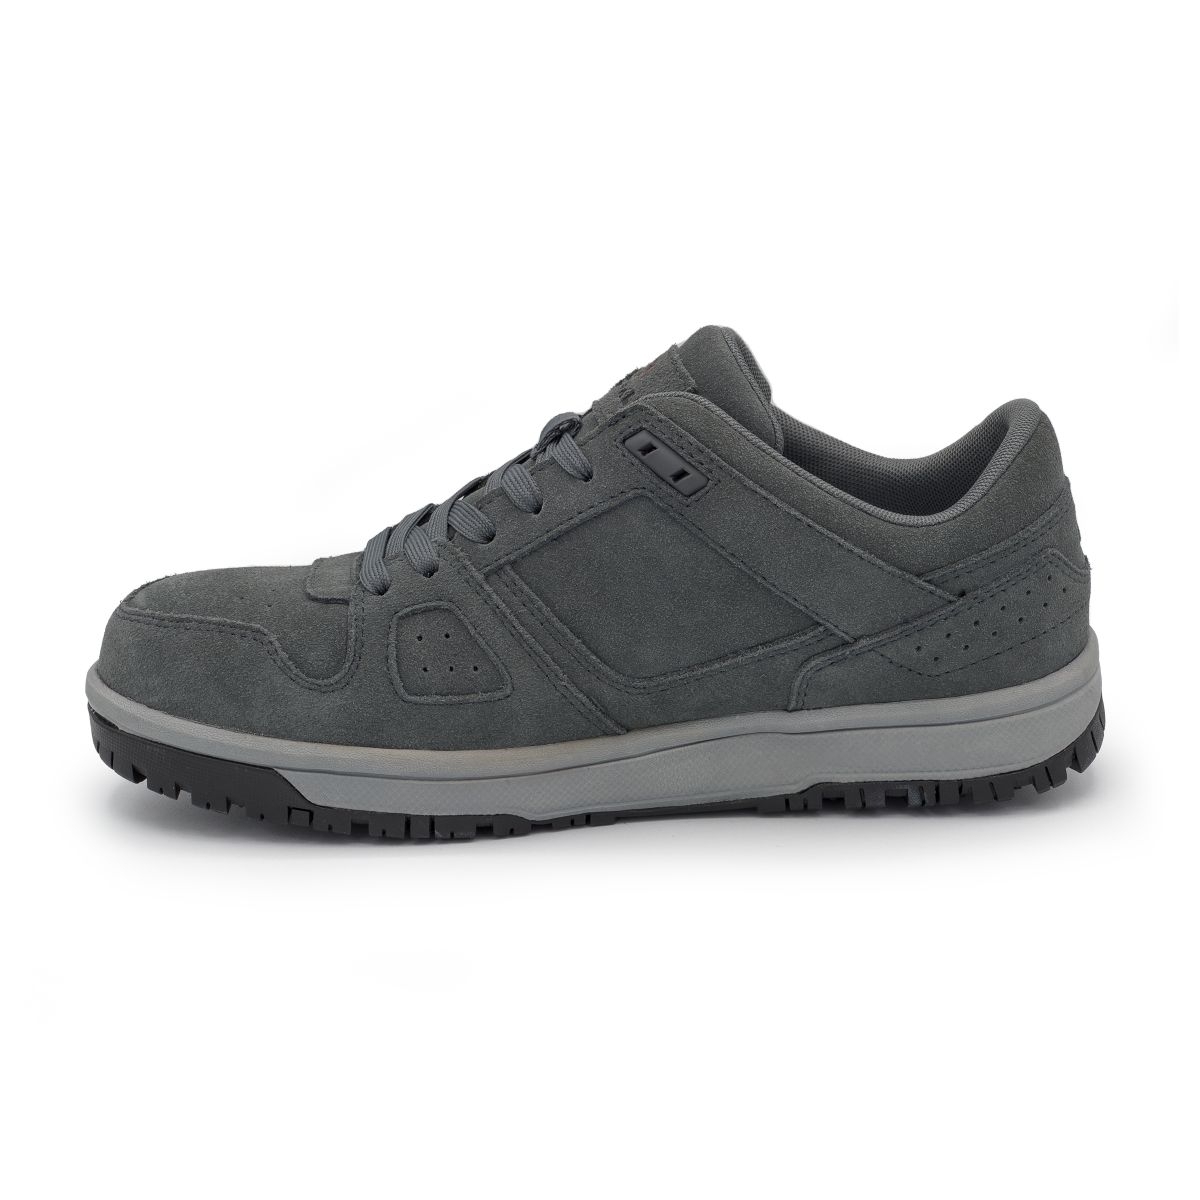 AIRWALK SAFETY Men's Mongo Composite Toe EH Work Shoe Charcoal/Grey - AW6301 CHARCOAL/GRAY - CHARCOAL/GRAY, 9-W